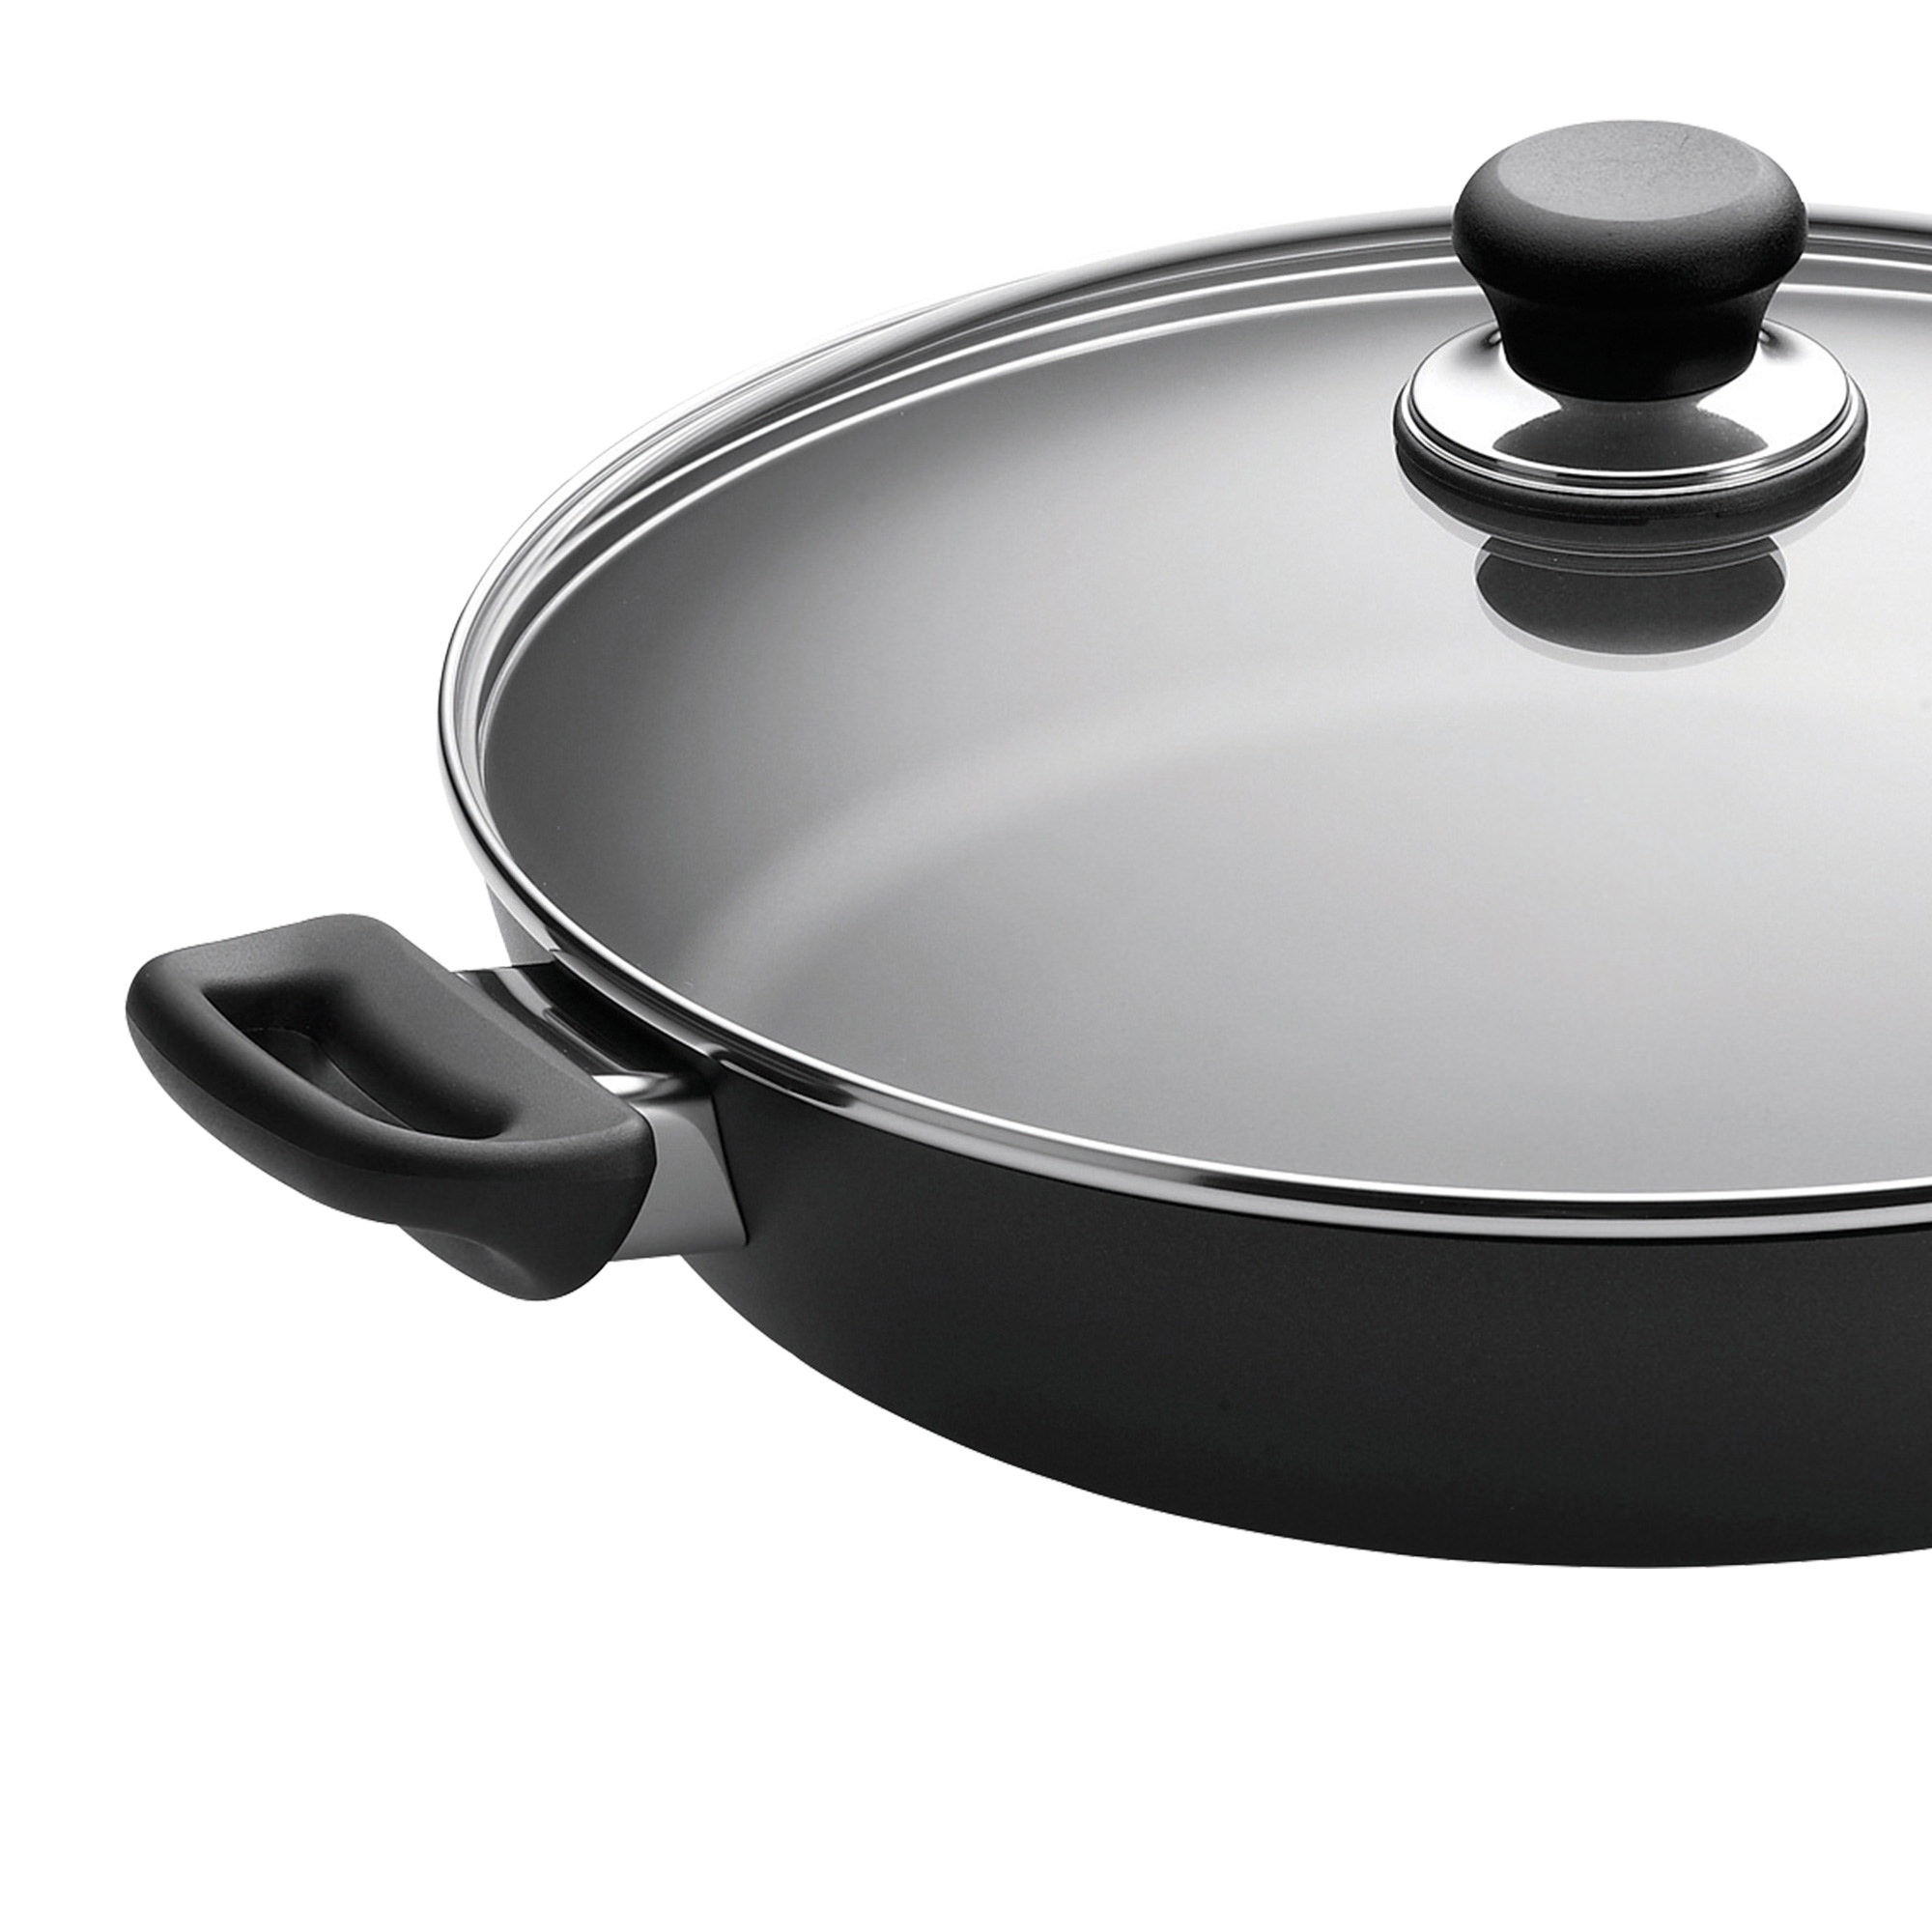 Scanpan Classic Covered Chef's Pan 32cm Image 2